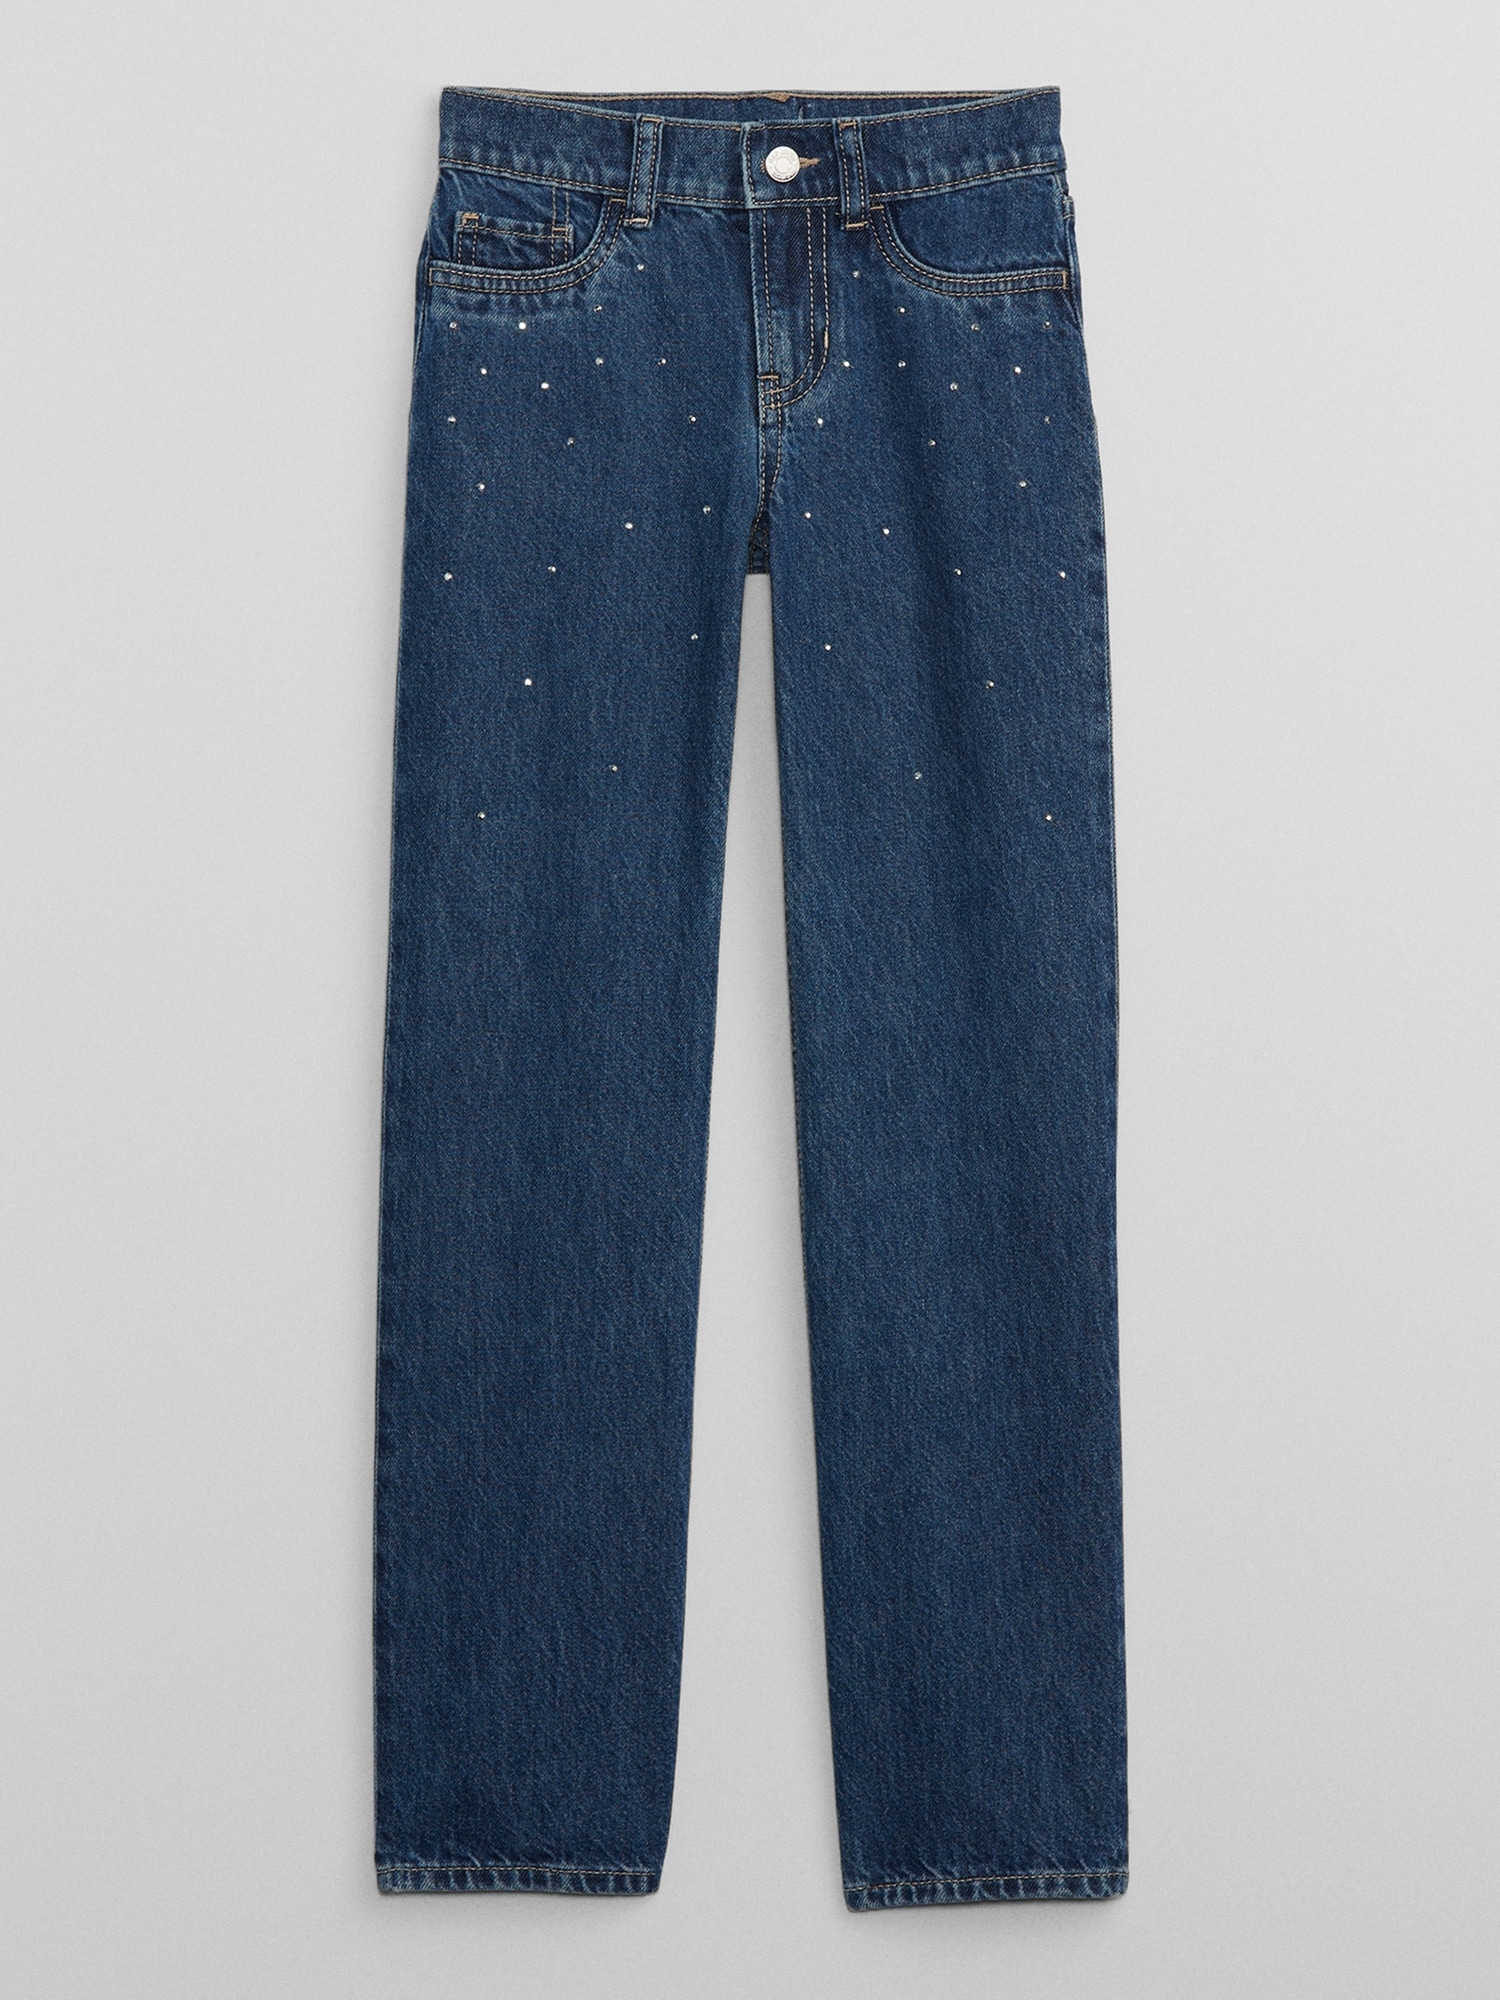 babyGap '90s Original Straight Cozy-Lined Jeans